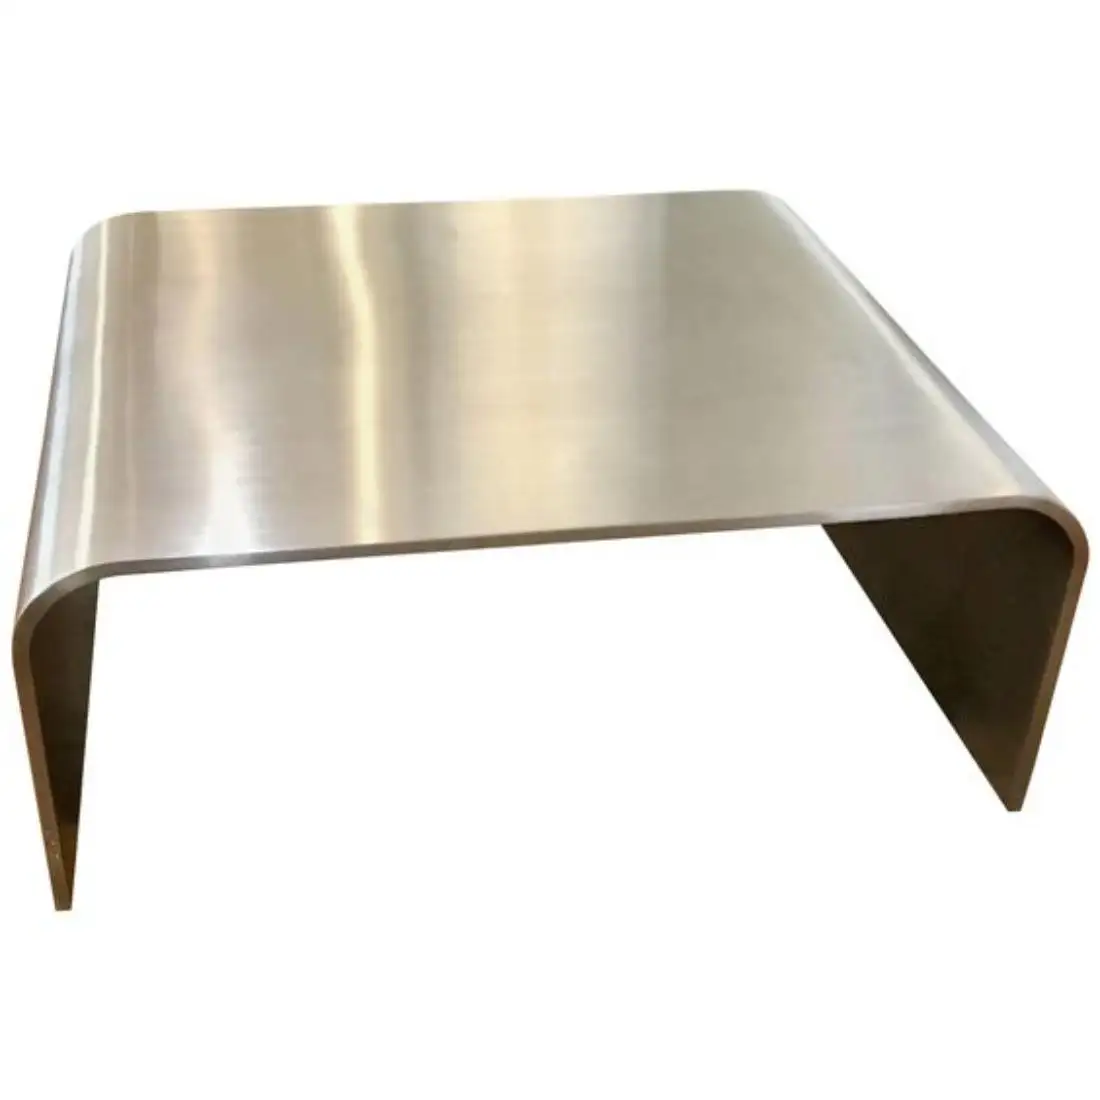 Large Aluminum Table Perfect Metal Furniture For Hotel And Restaurants Unique Selling Dinning Table Guest Room Decorative Desk